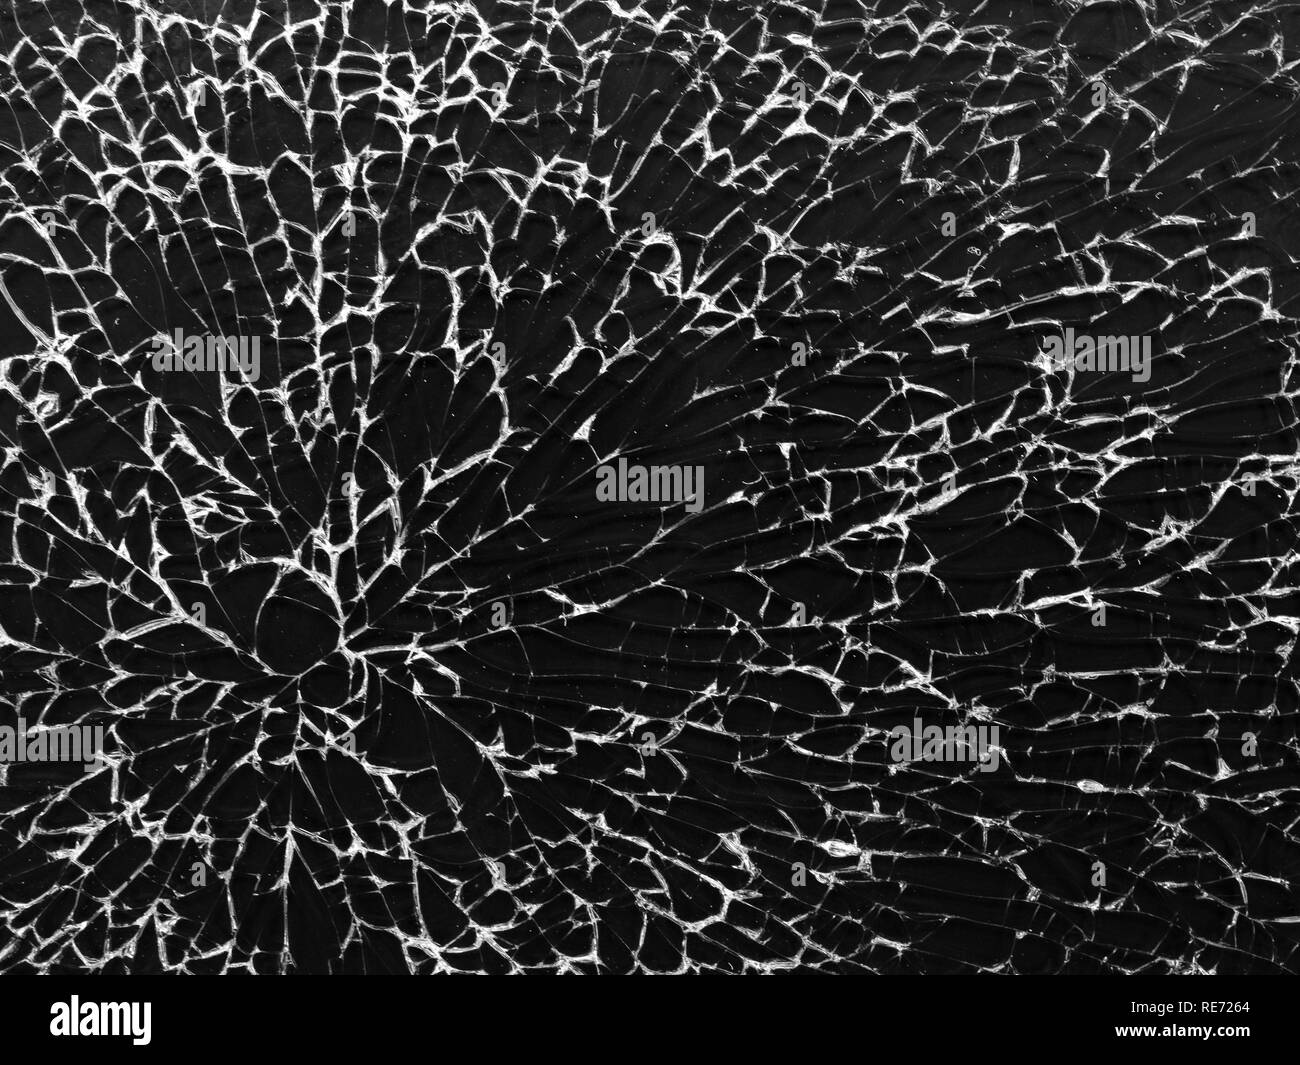 Cracked glass texture on black background. Isolated realistic cracked glass effect. Stock Photo